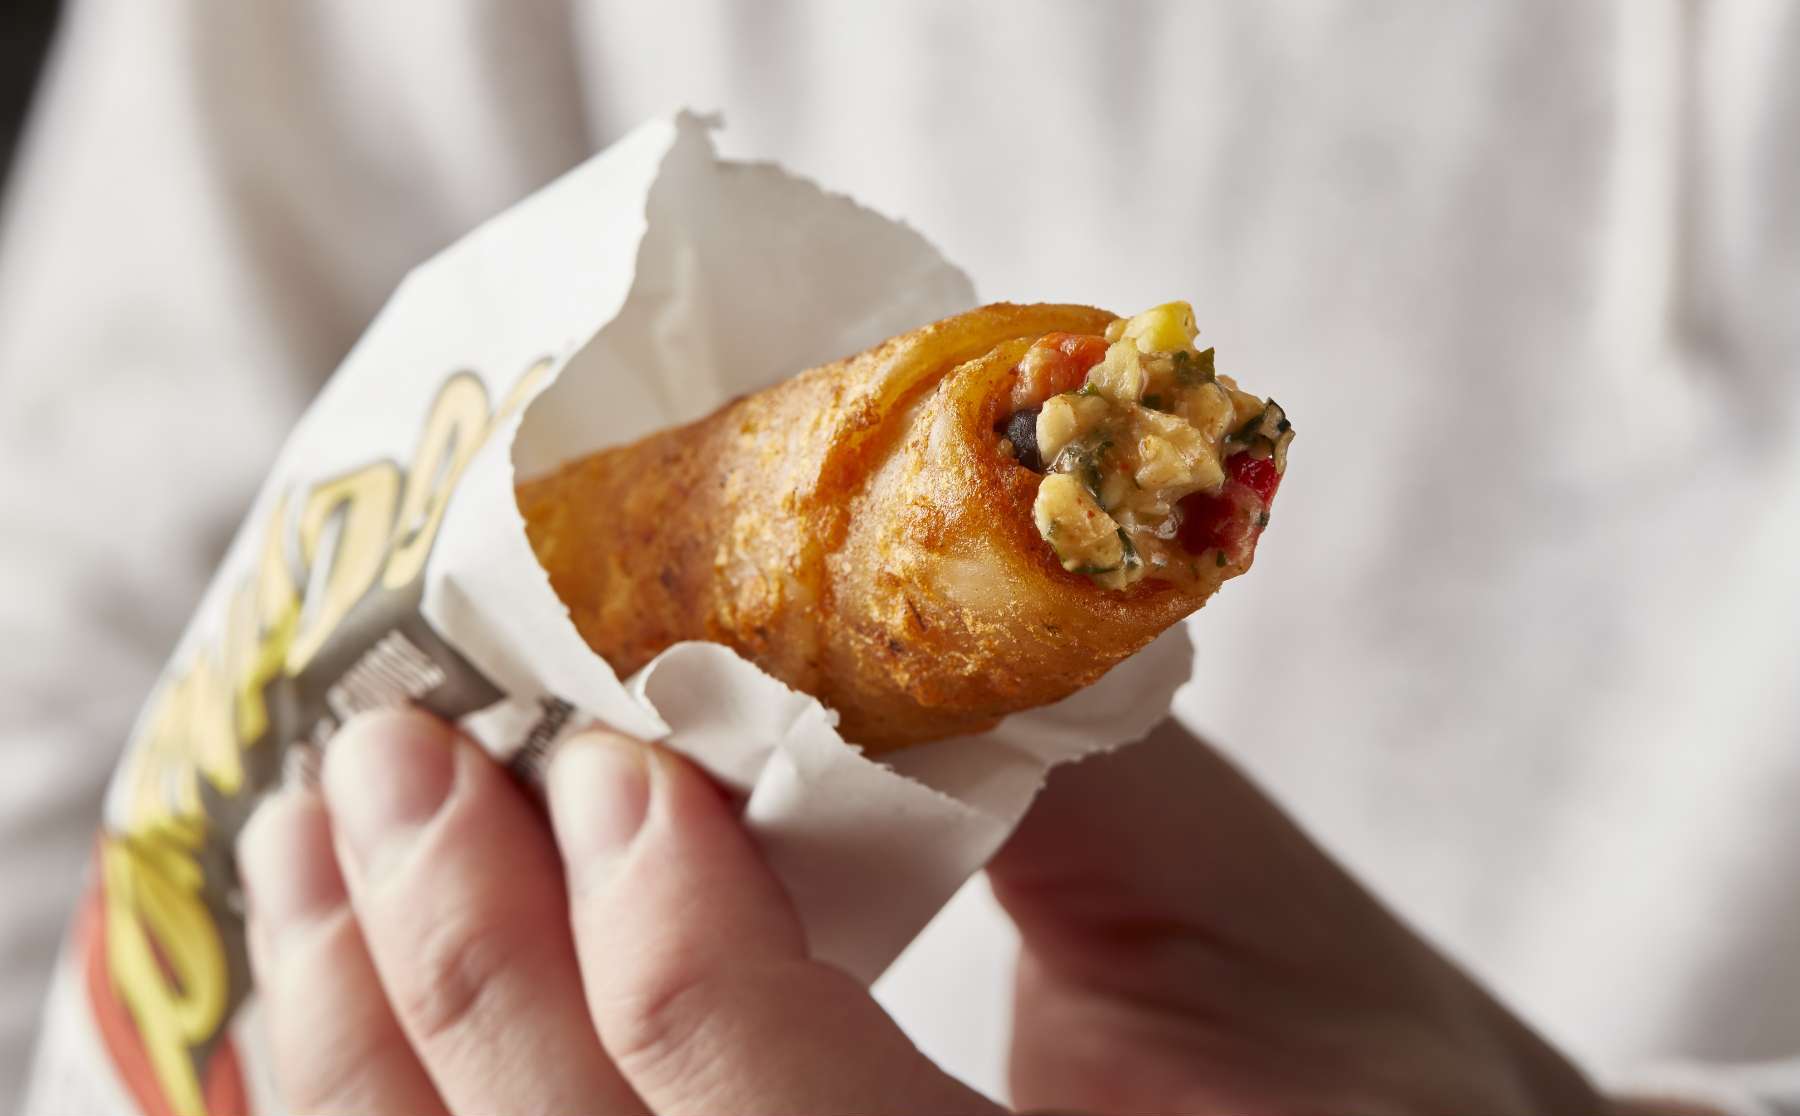 hand holding a Tornados taquito filled with chicken, corn and sauce in a serving sleeve